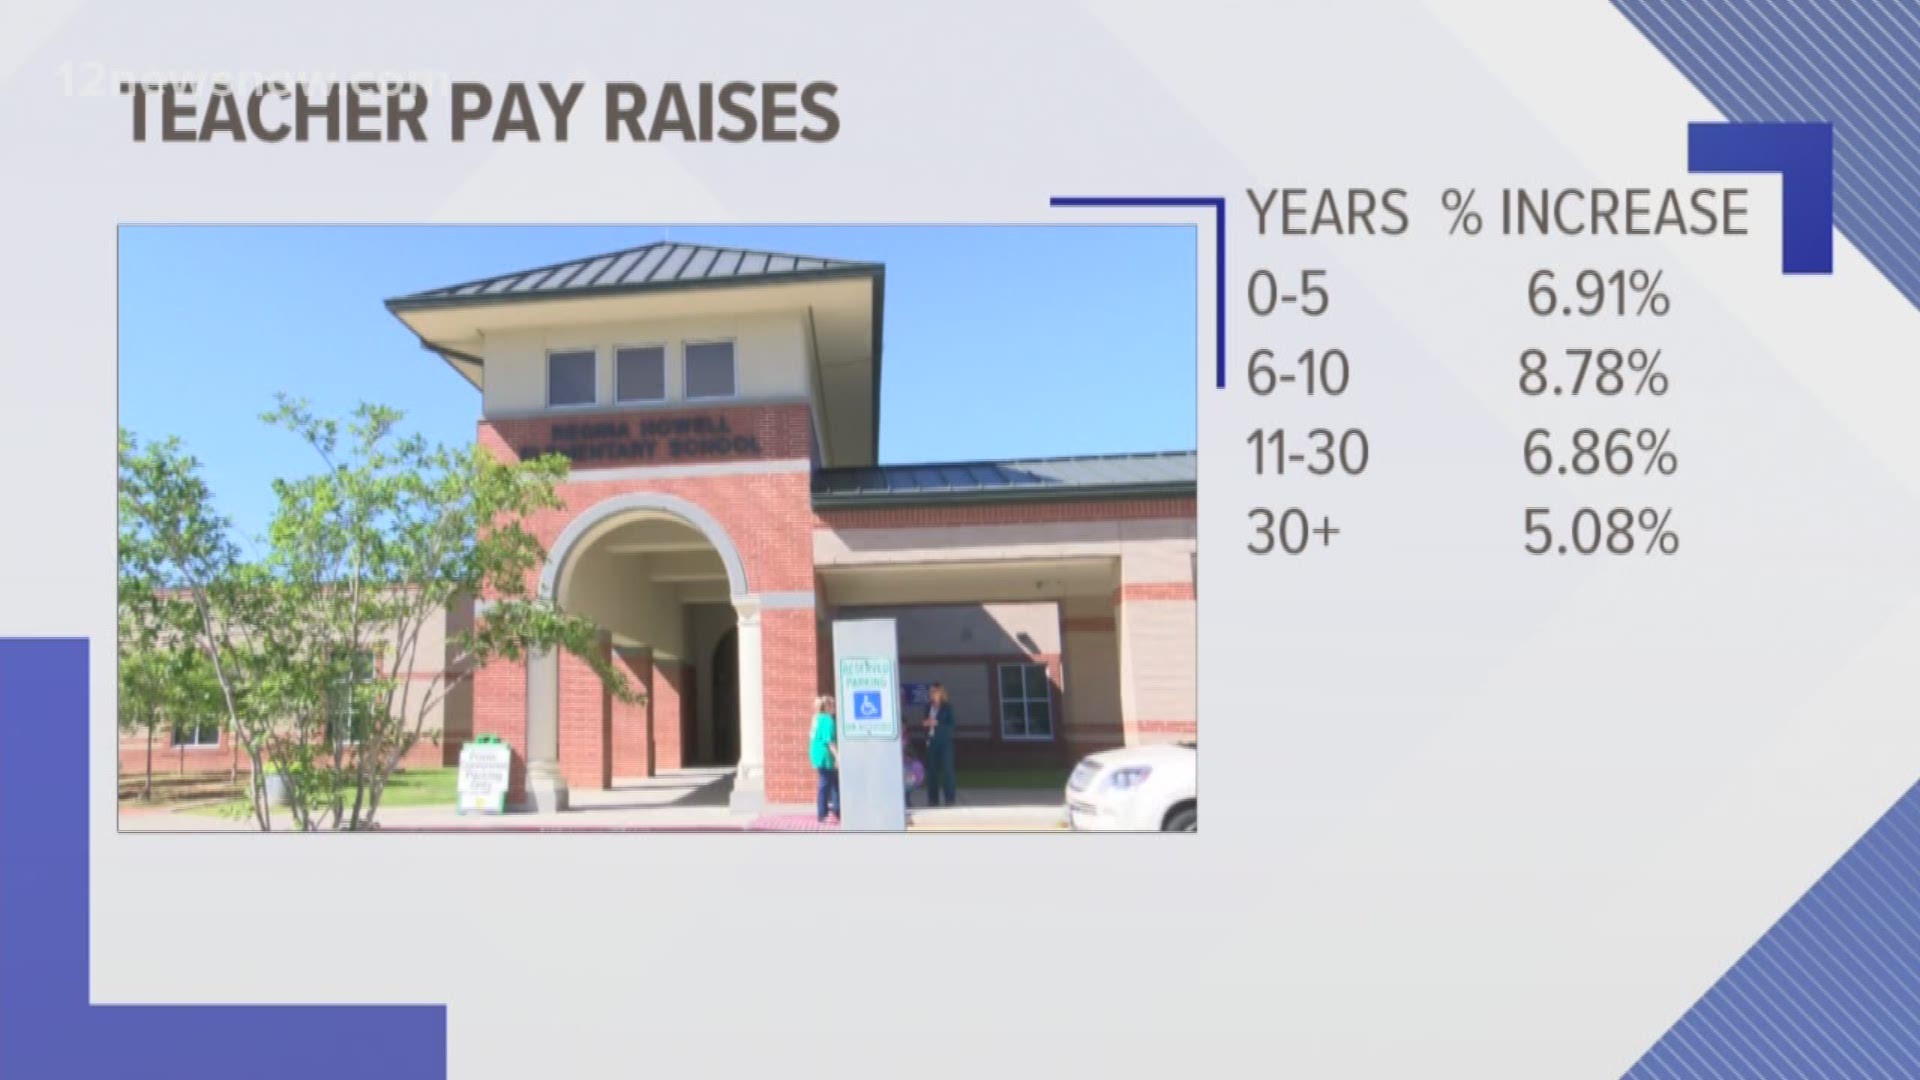 Beaumont ISD released the employee raise percentages based on years of experience.